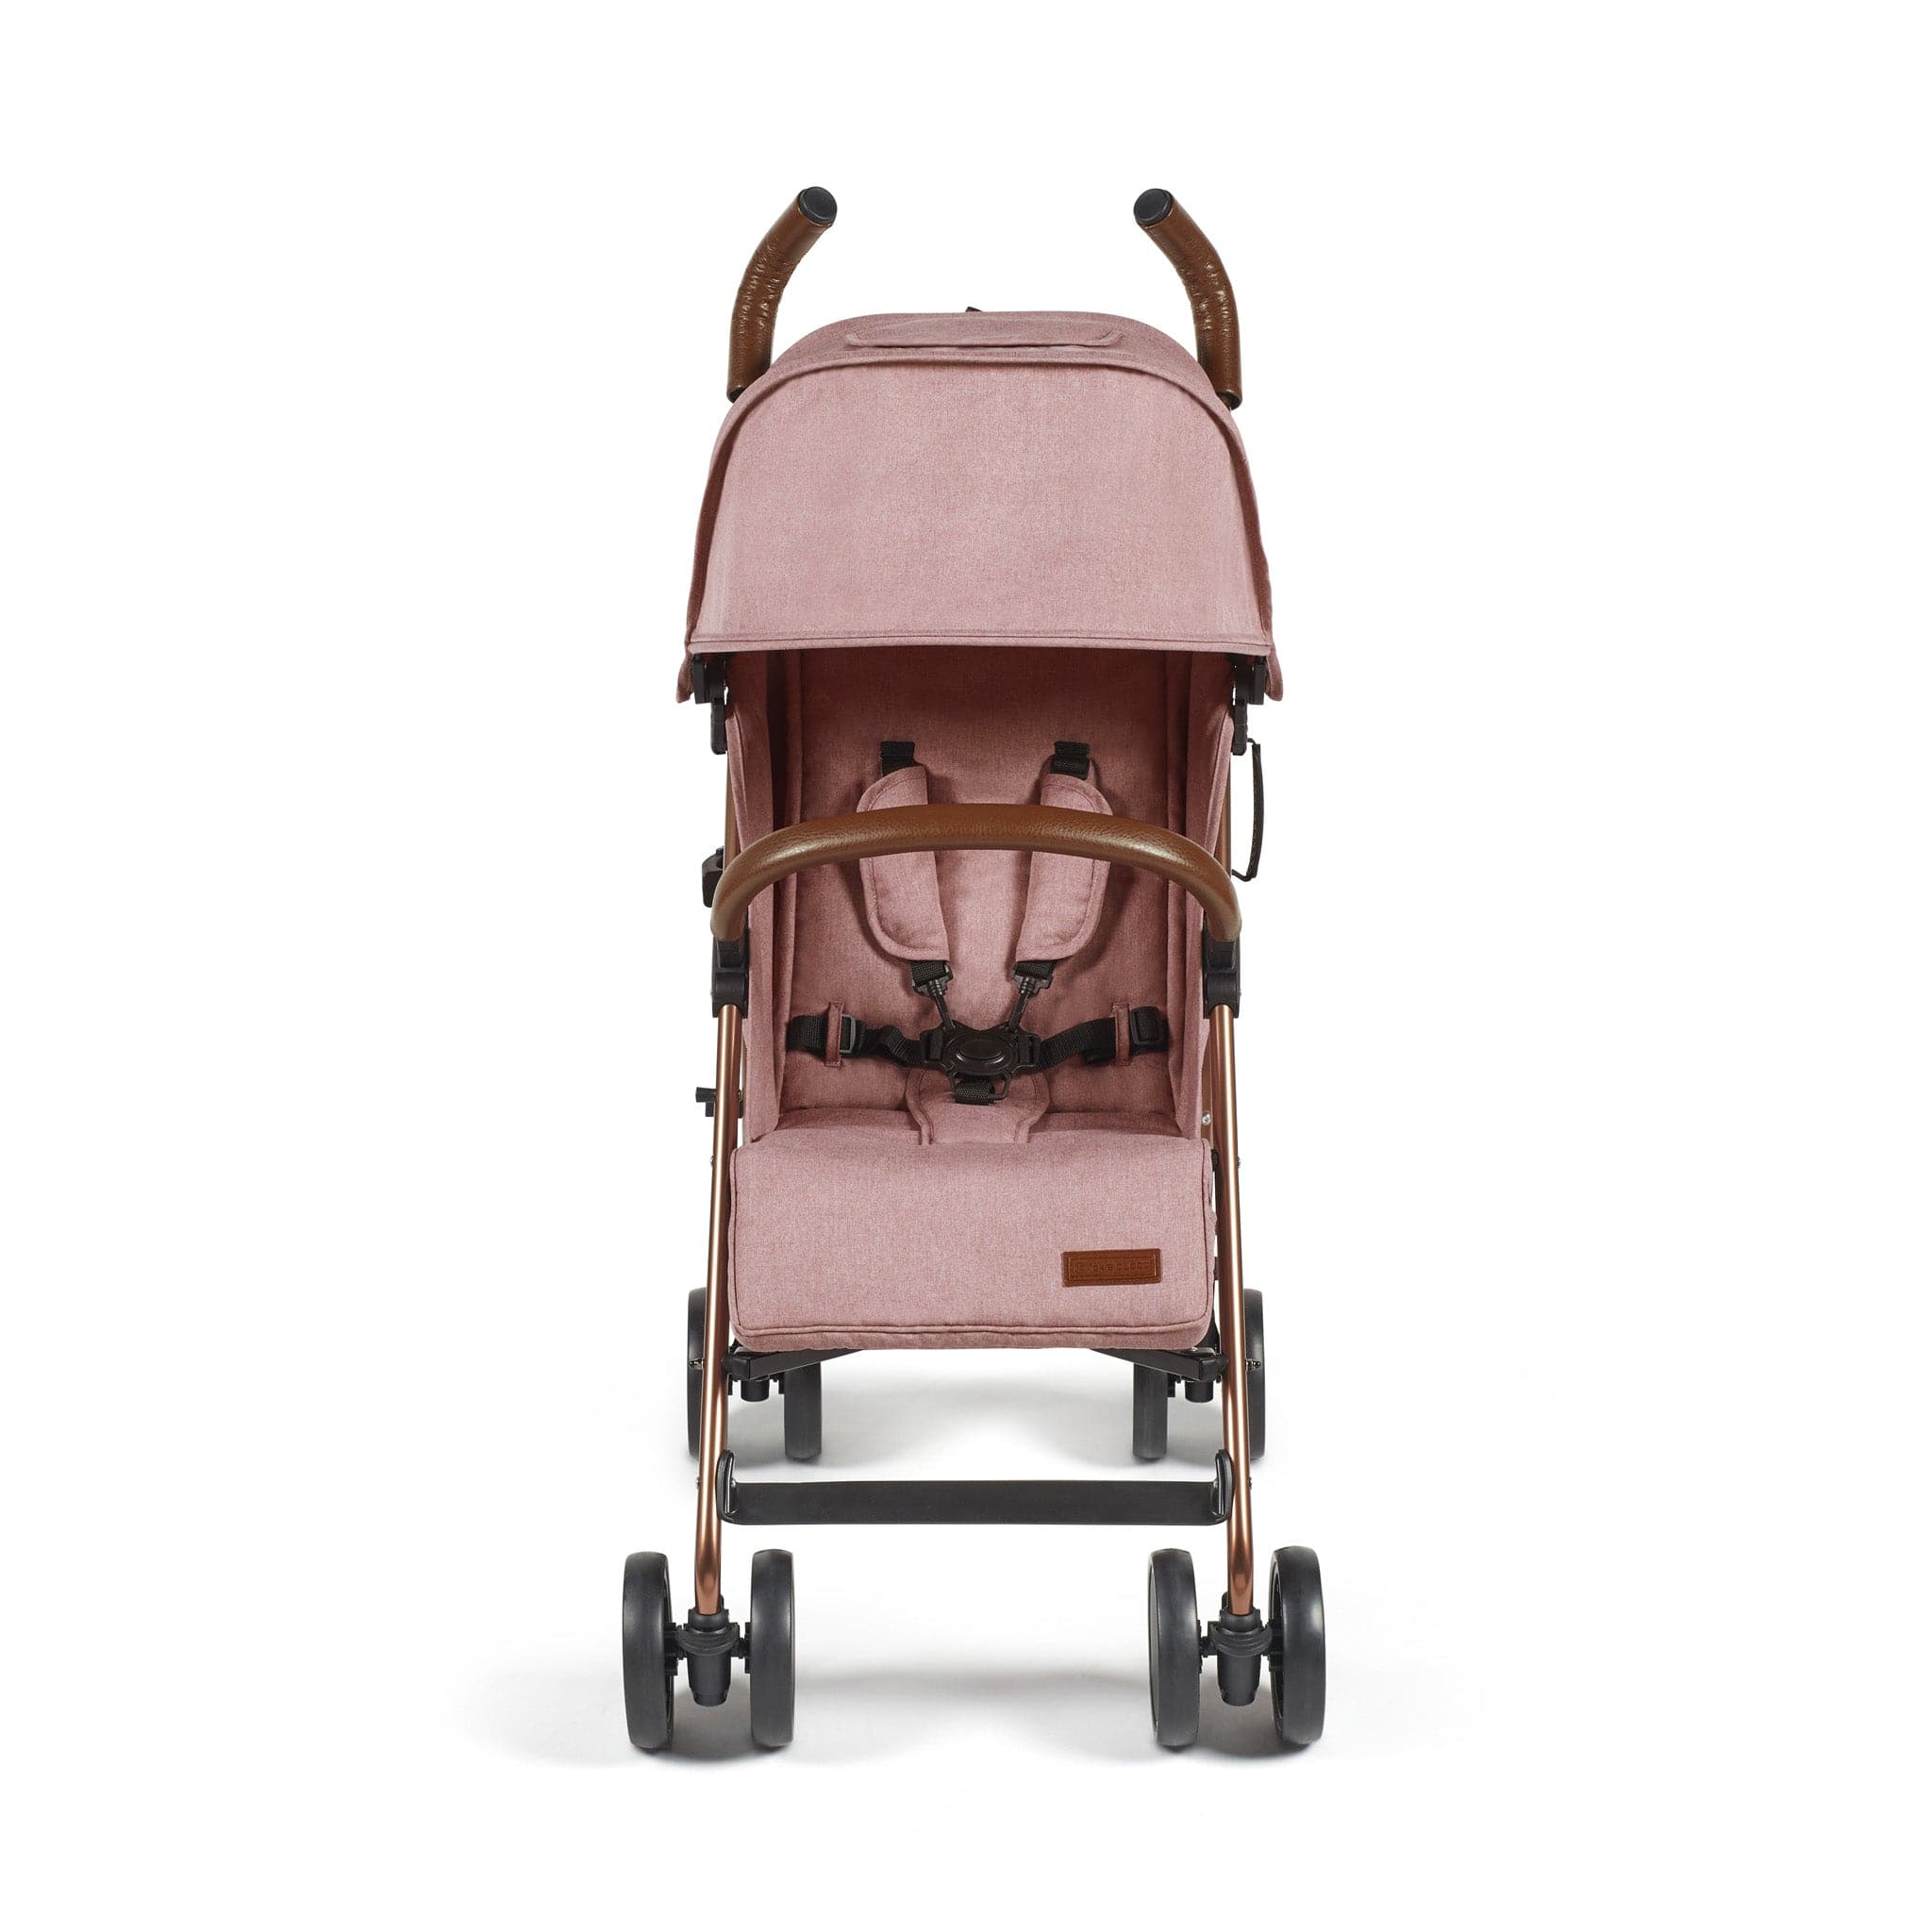 Ickle Bubba baby pushchairs Ickle Bubba Discovery Prime Pushchair Dusky Pink/Rose Gold 15-002-300-121